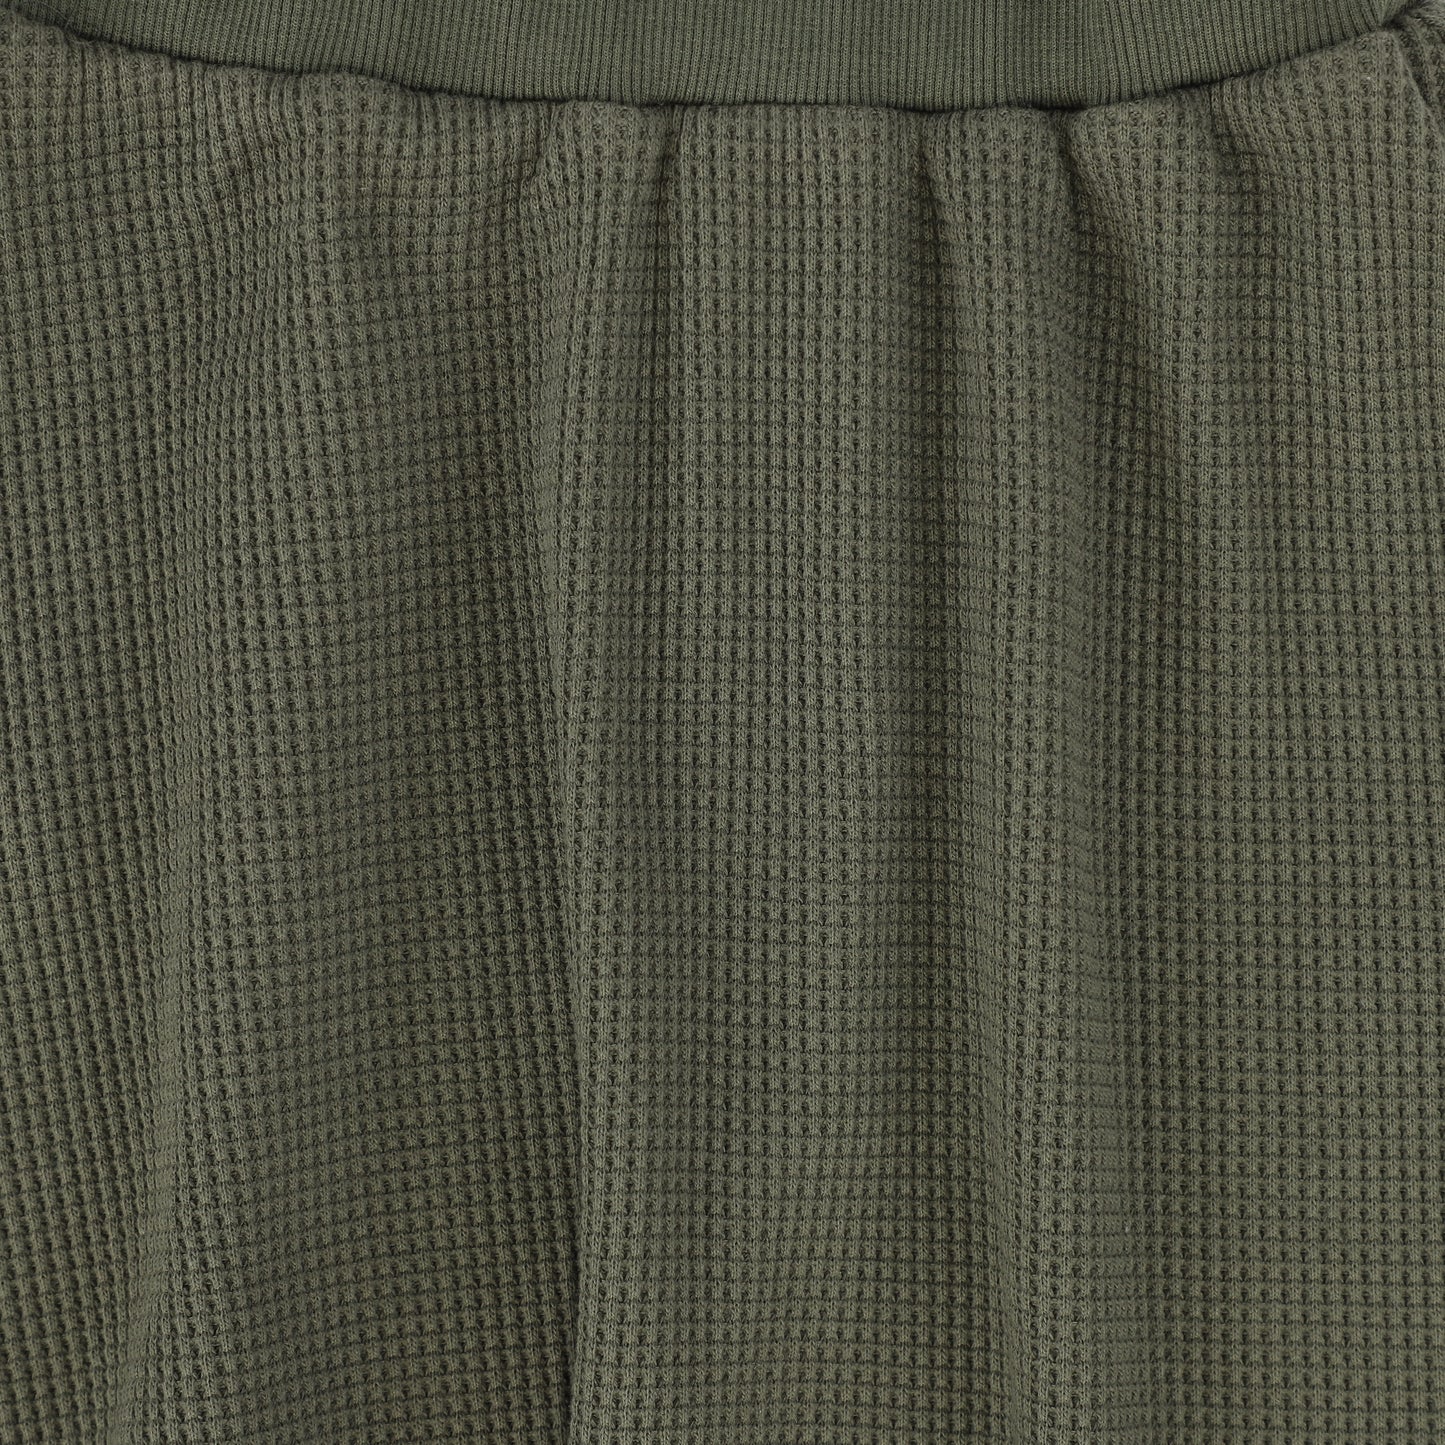 PHIL AND PHOEBE HUNTER GREEN A LINE SKIRT